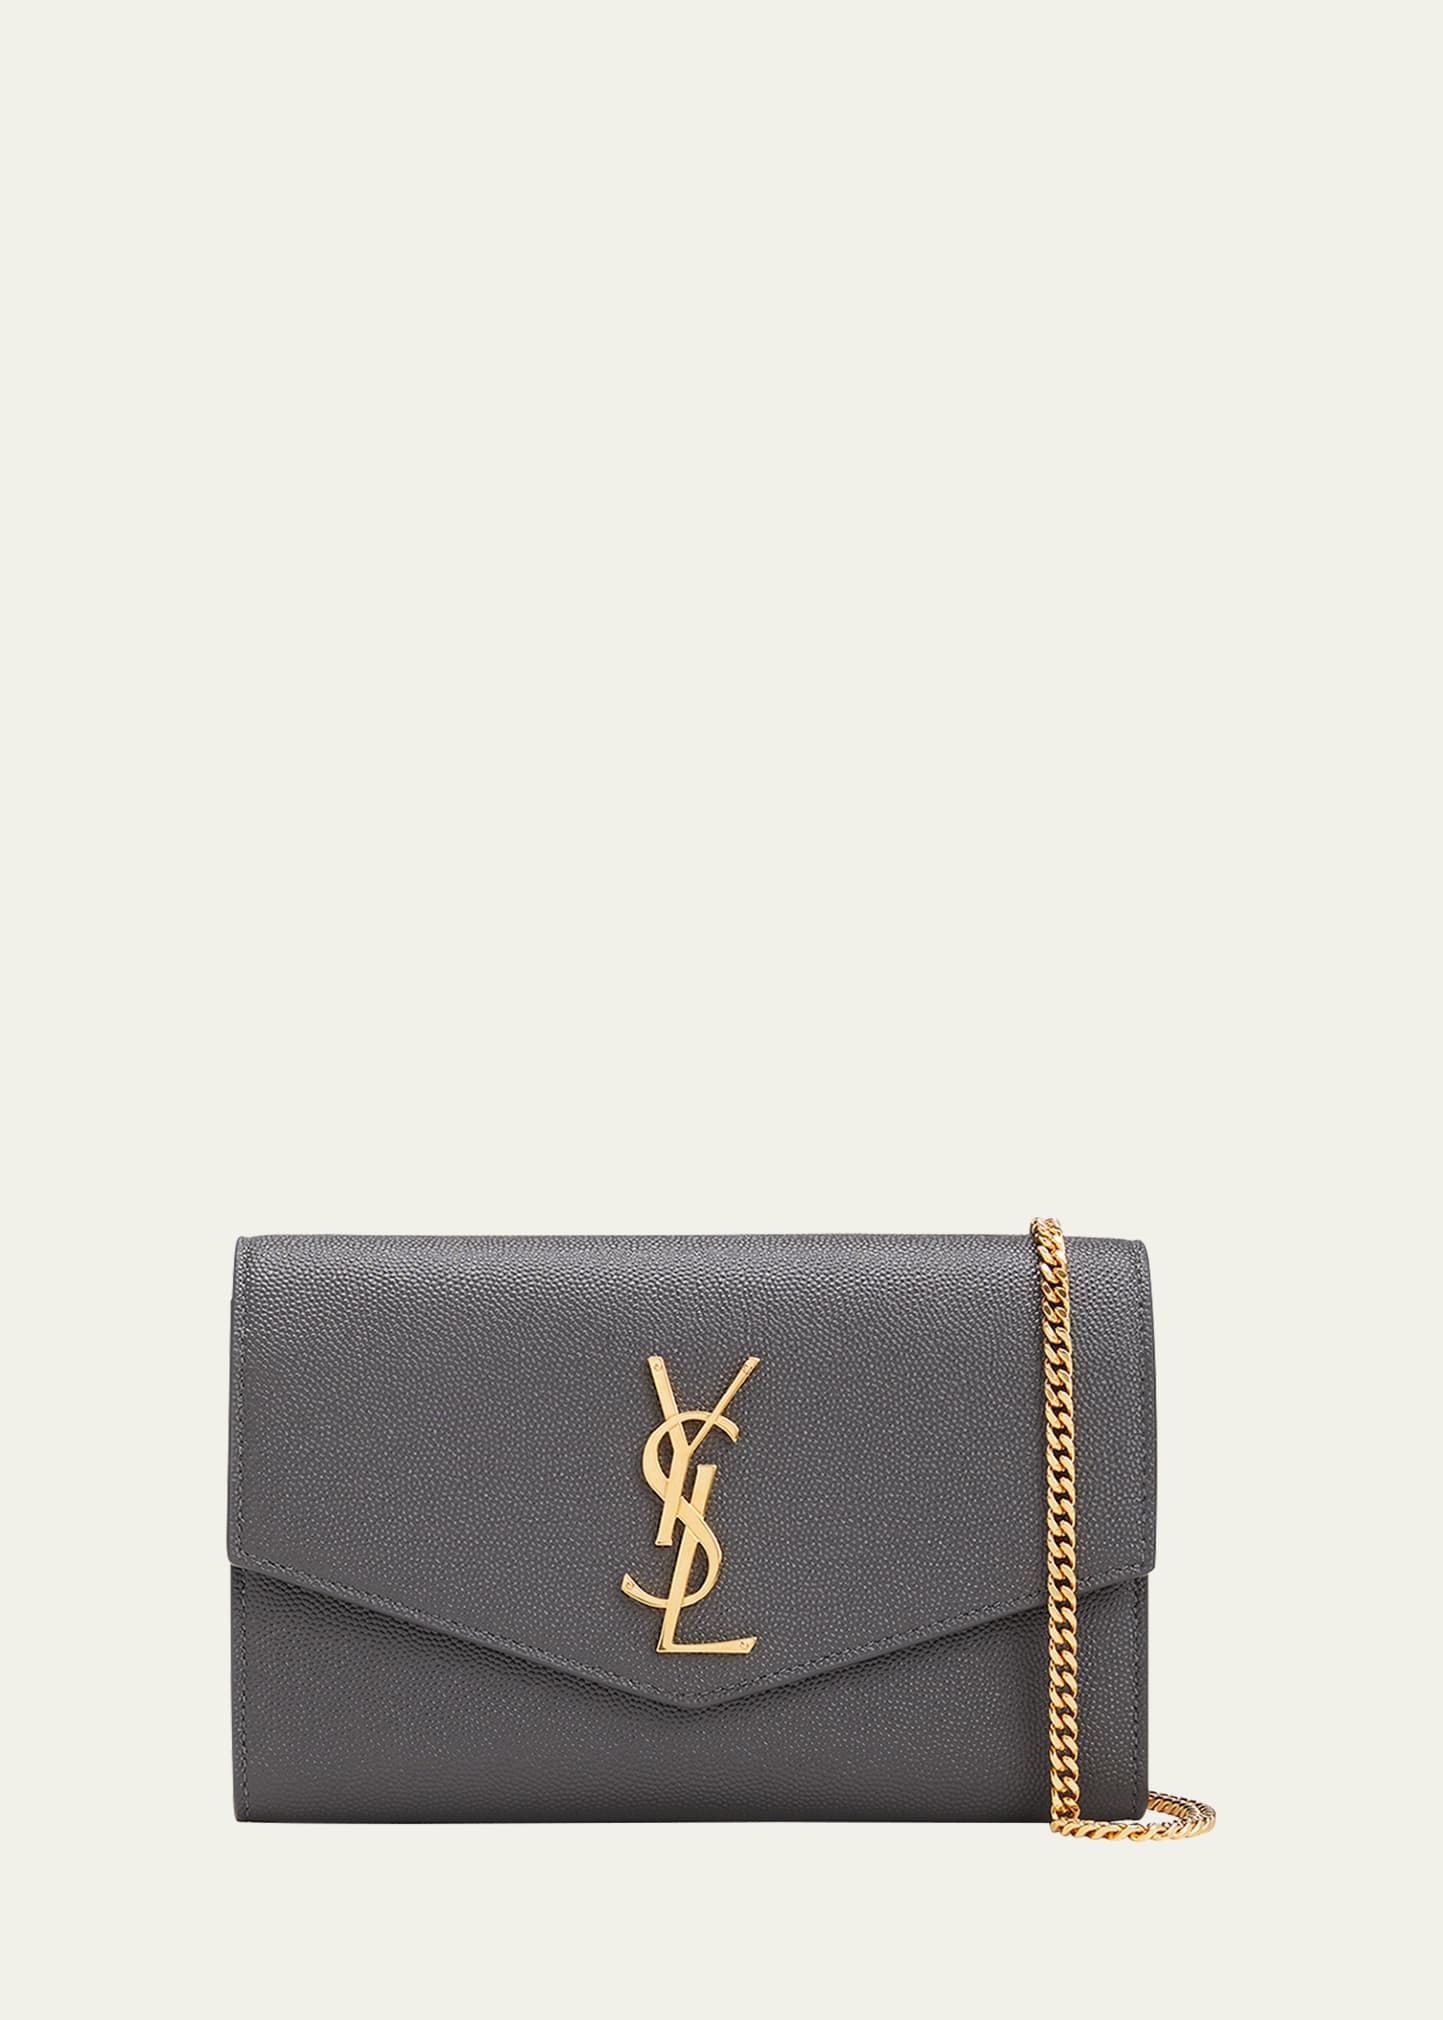 Saint Laurent Uptown Ysl Wallet On Chain In Grained Leather In Storm